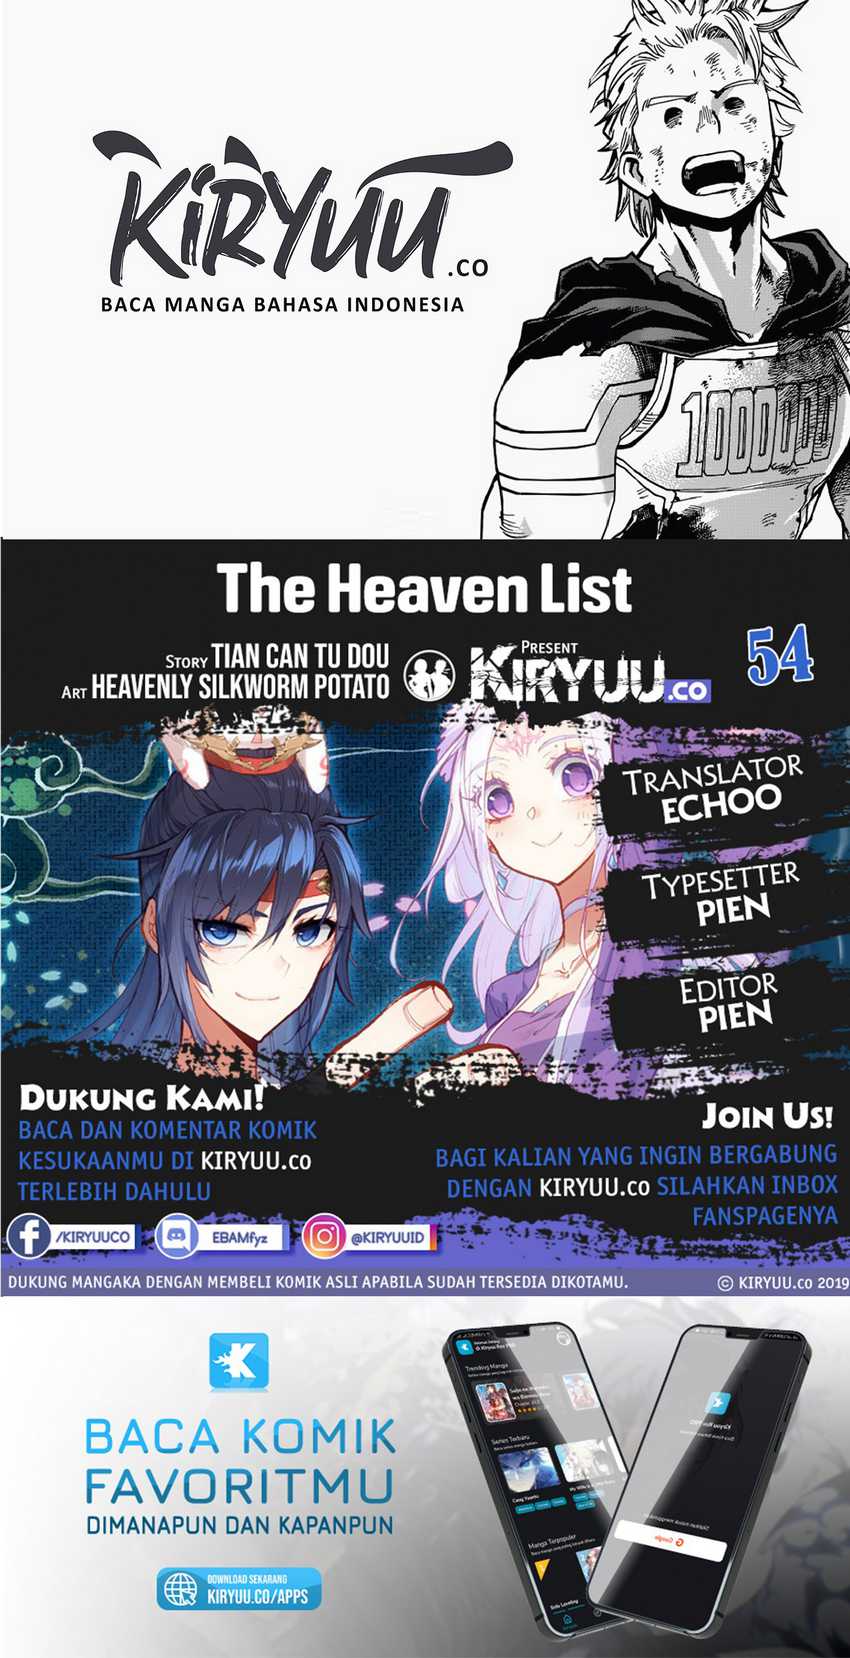 The Heaven List Chapter 54